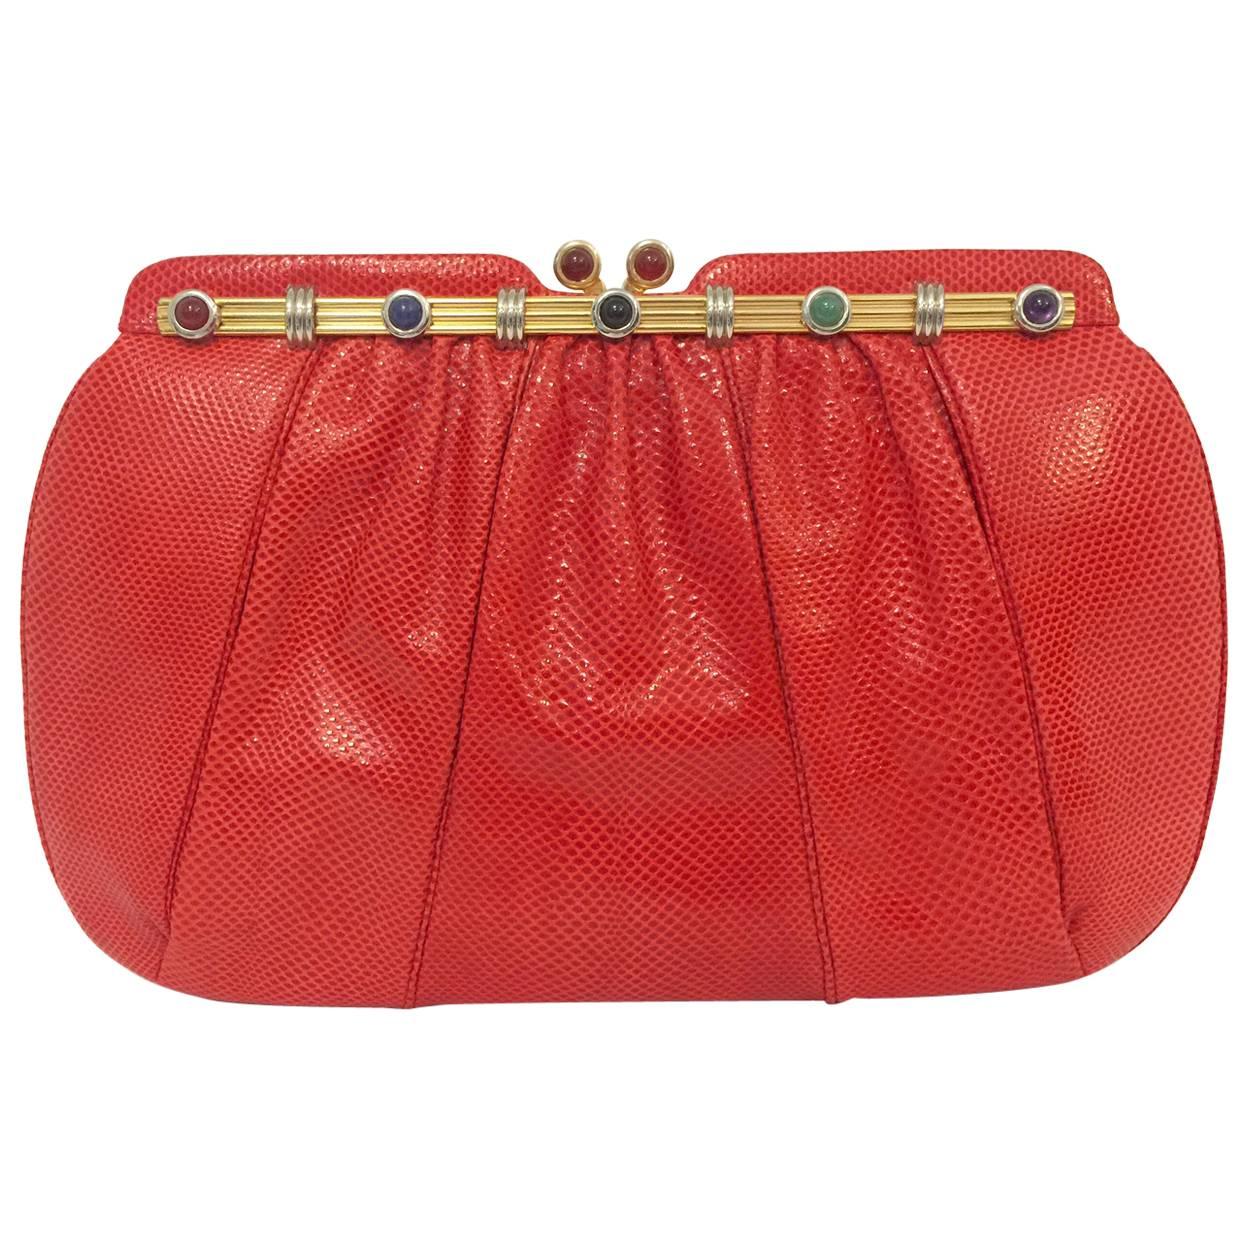 Vintage Red Lizard Judith Leiber Convertible Clutch With Semi Precious Jewels